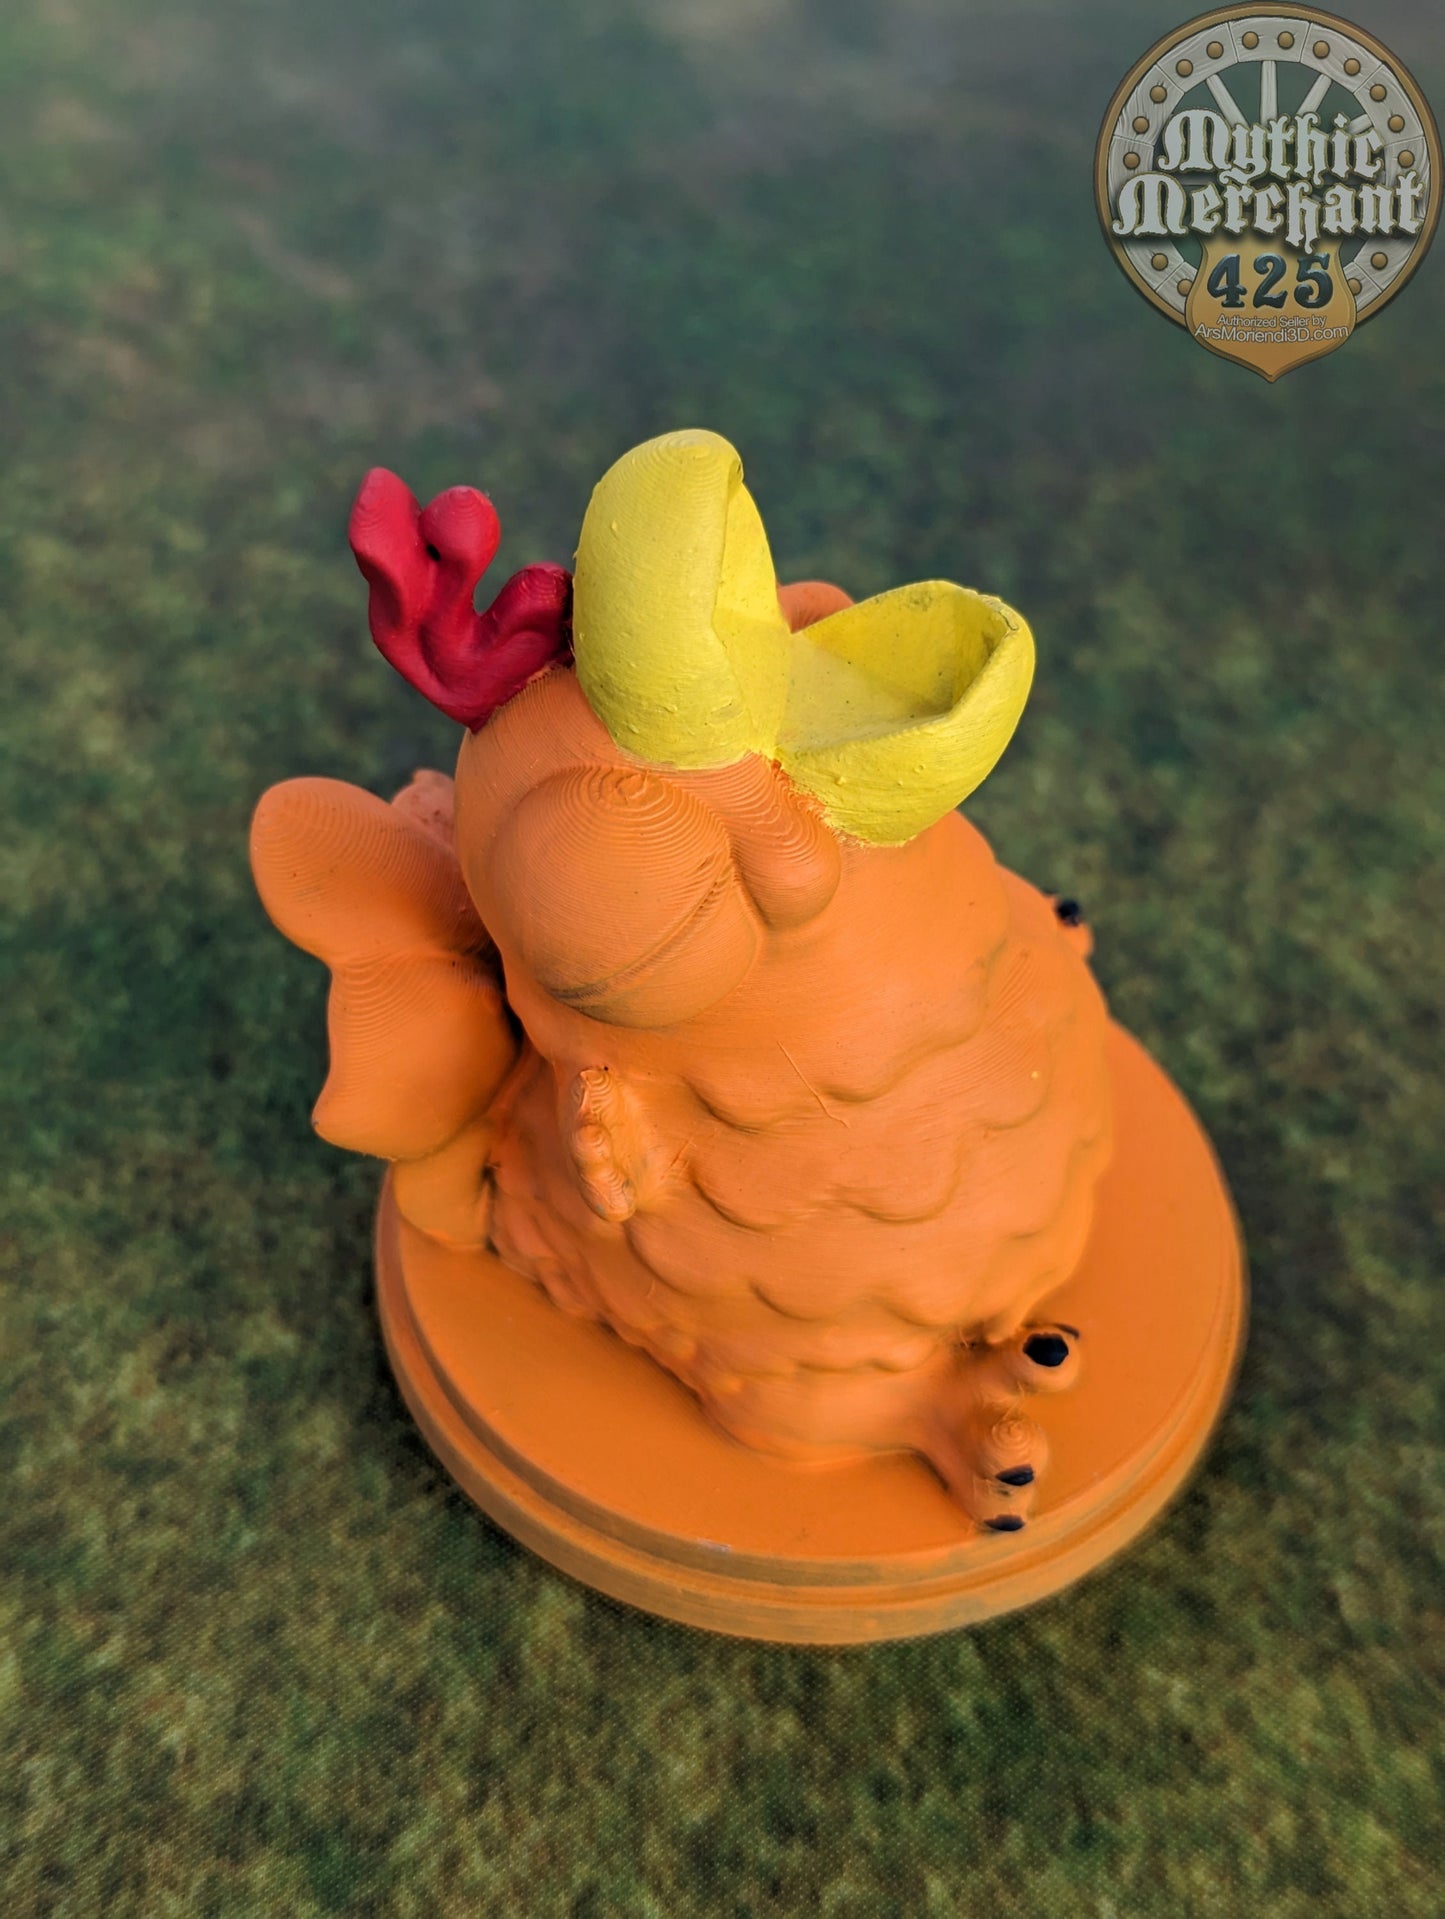 Baby Phoenix Toy 3D Printed Dice Guardian - Dice Jail | RPG Dice Vault | D20 Box | Player Unique Gift - Playful Dice Holder!